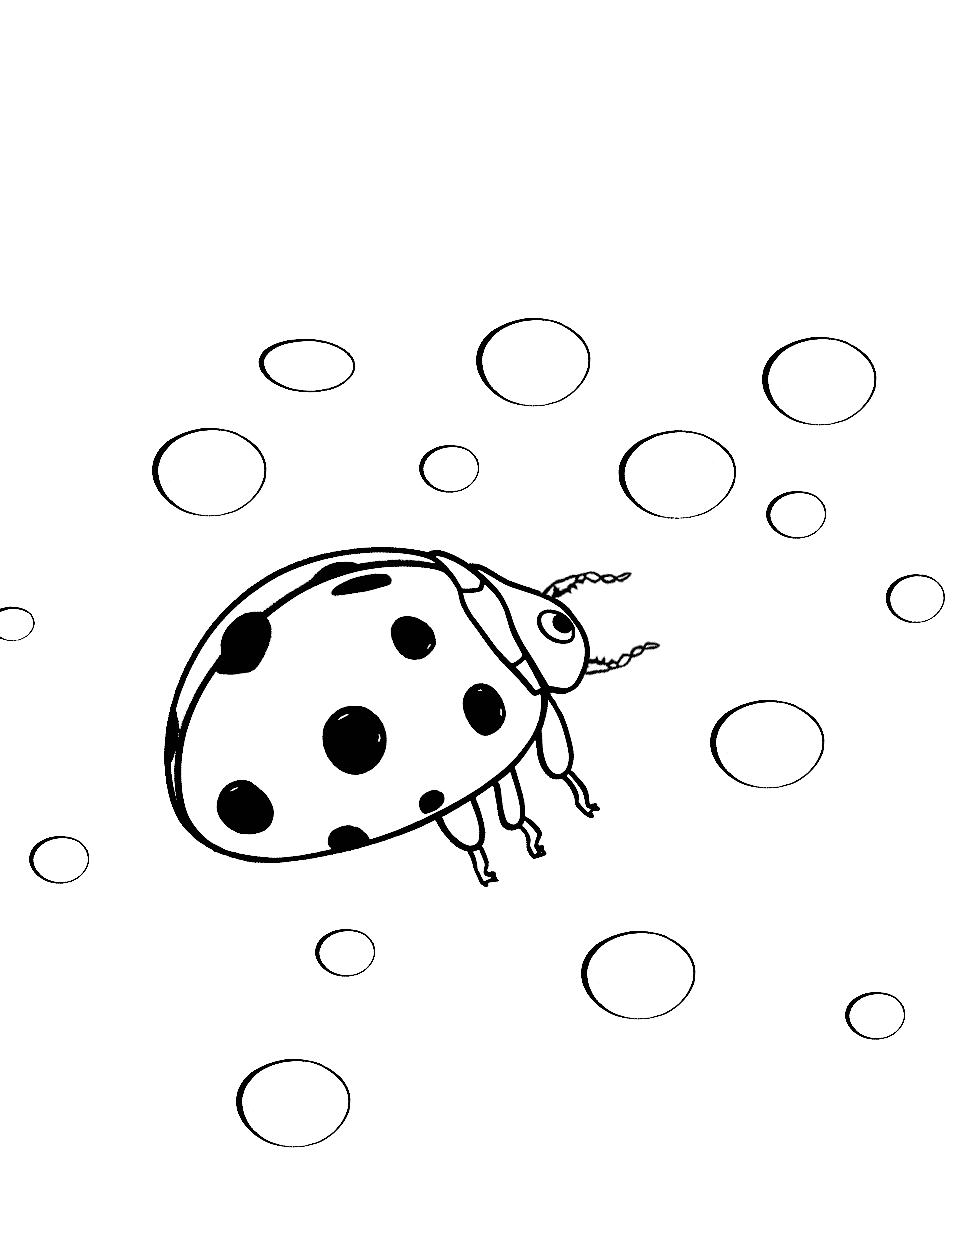 Baby Ladybug's Discovery Ladybug Coloring Page - A baby ladybug encountering a dewdrop for the first time.